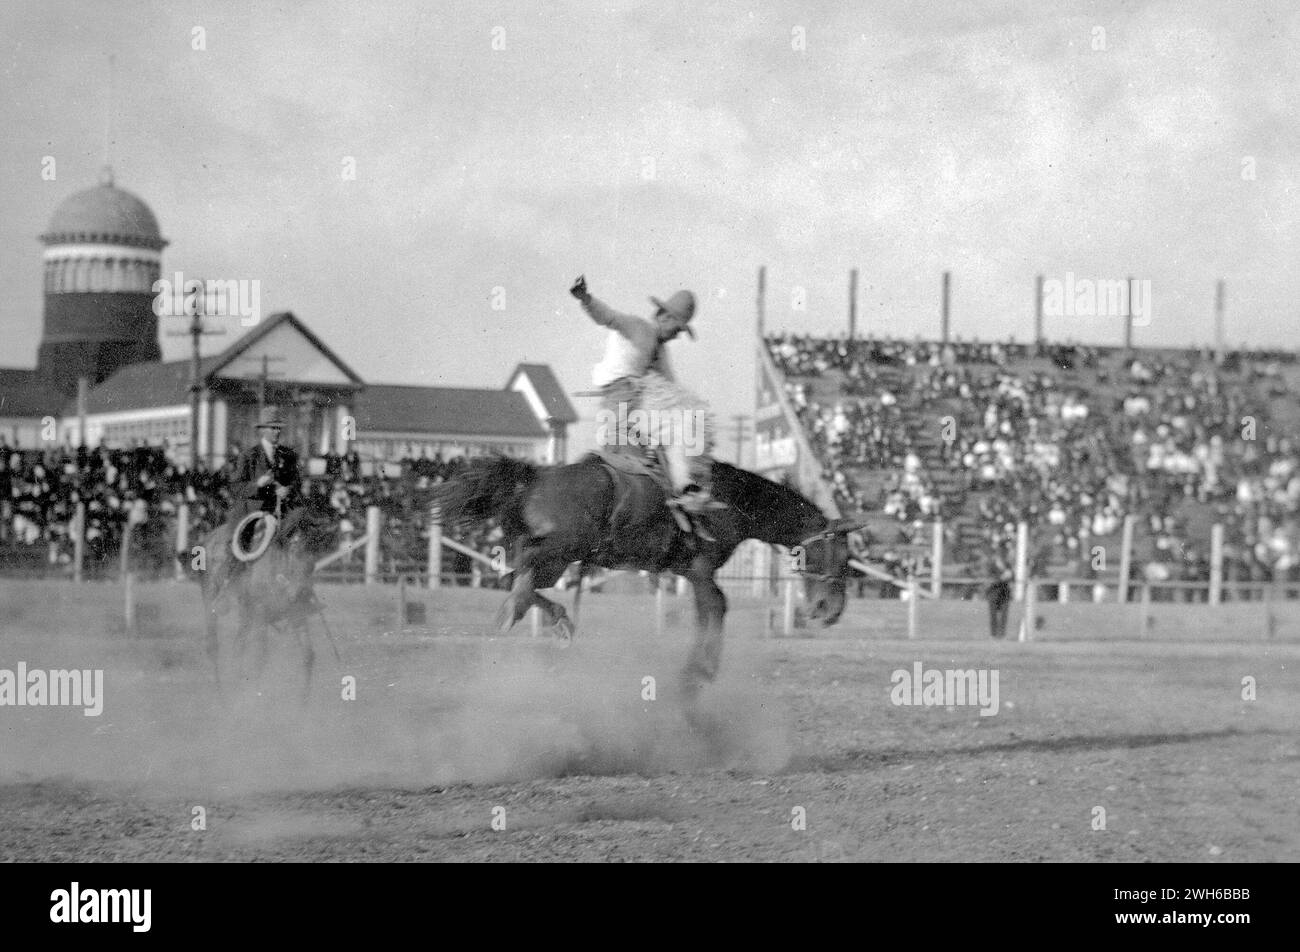 Calgary Stampede, Canada.  1919.  'Emery Le Grand on a high one'.  Man bronco riding horse in rodeo event Stock Photo